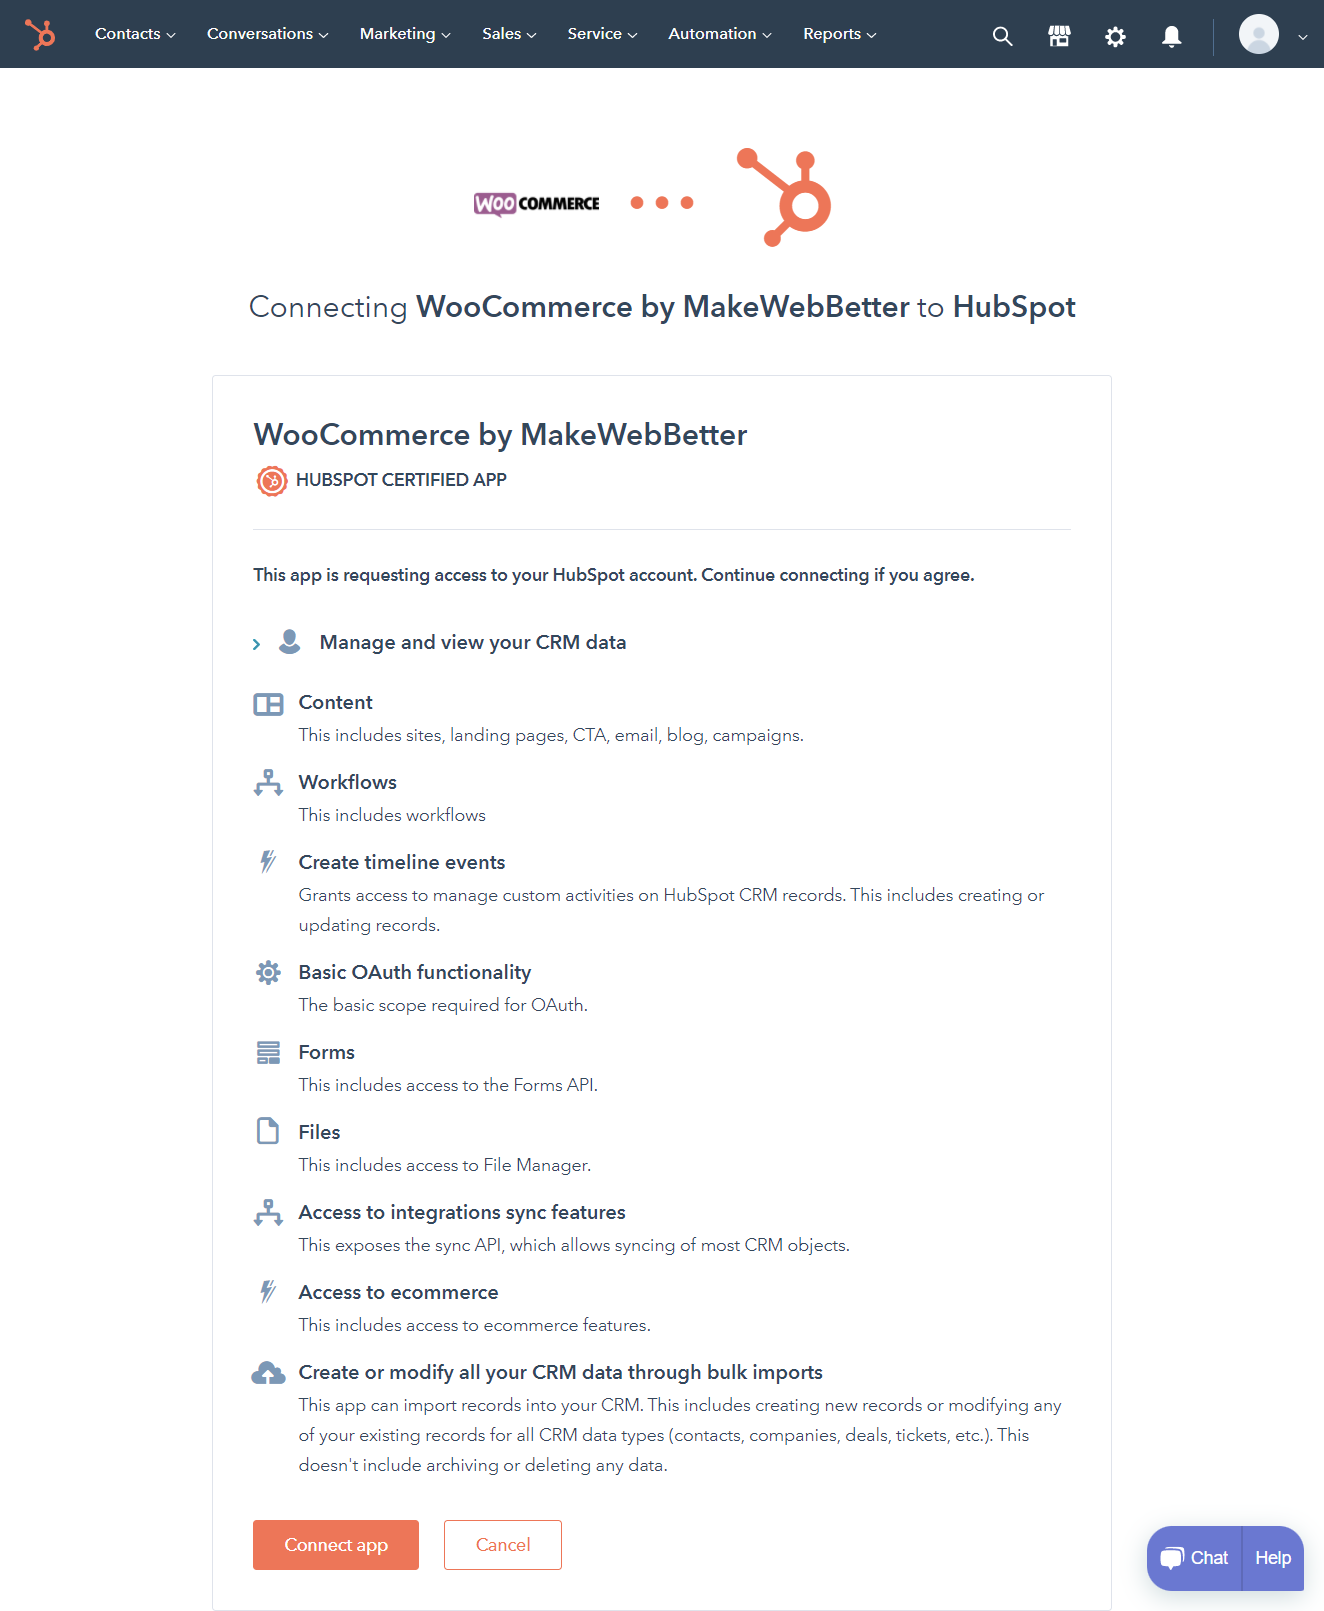 Connect WooCommerce by MakeWebBetter to HubSpot page